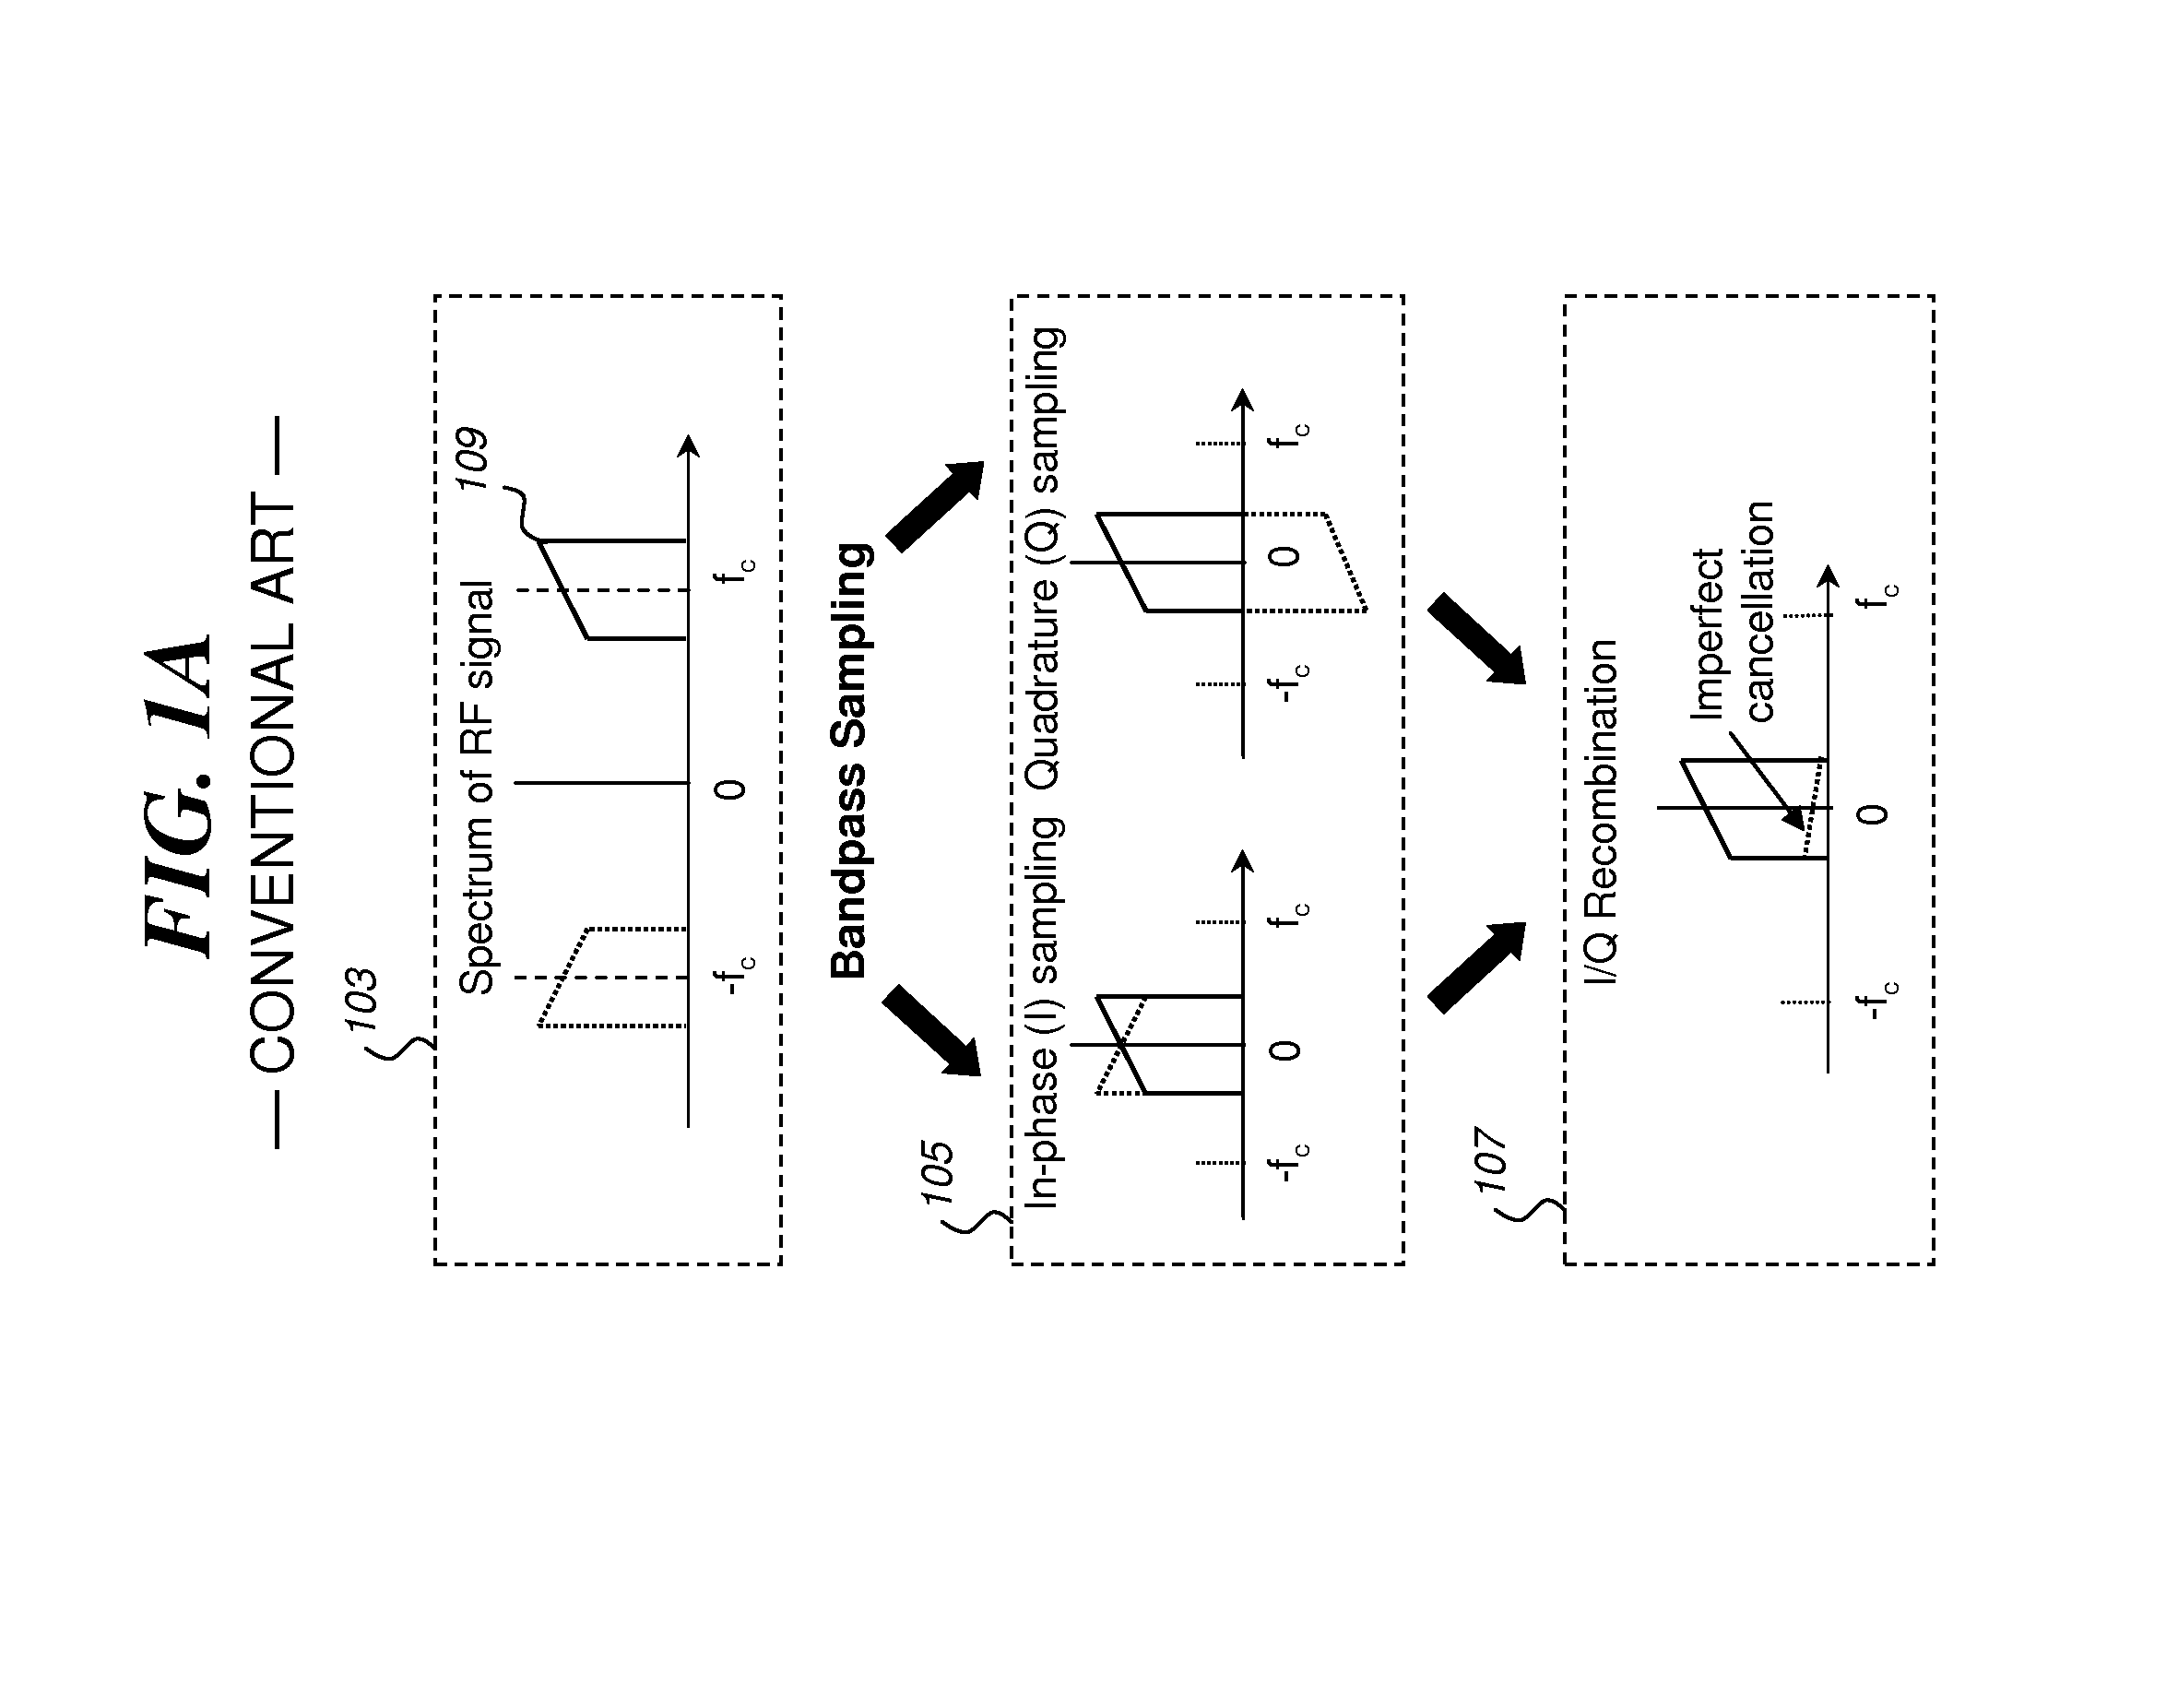 Apparatus and method for calibrating the I/Q mismatch in a quadrature bandpass sampling receiver